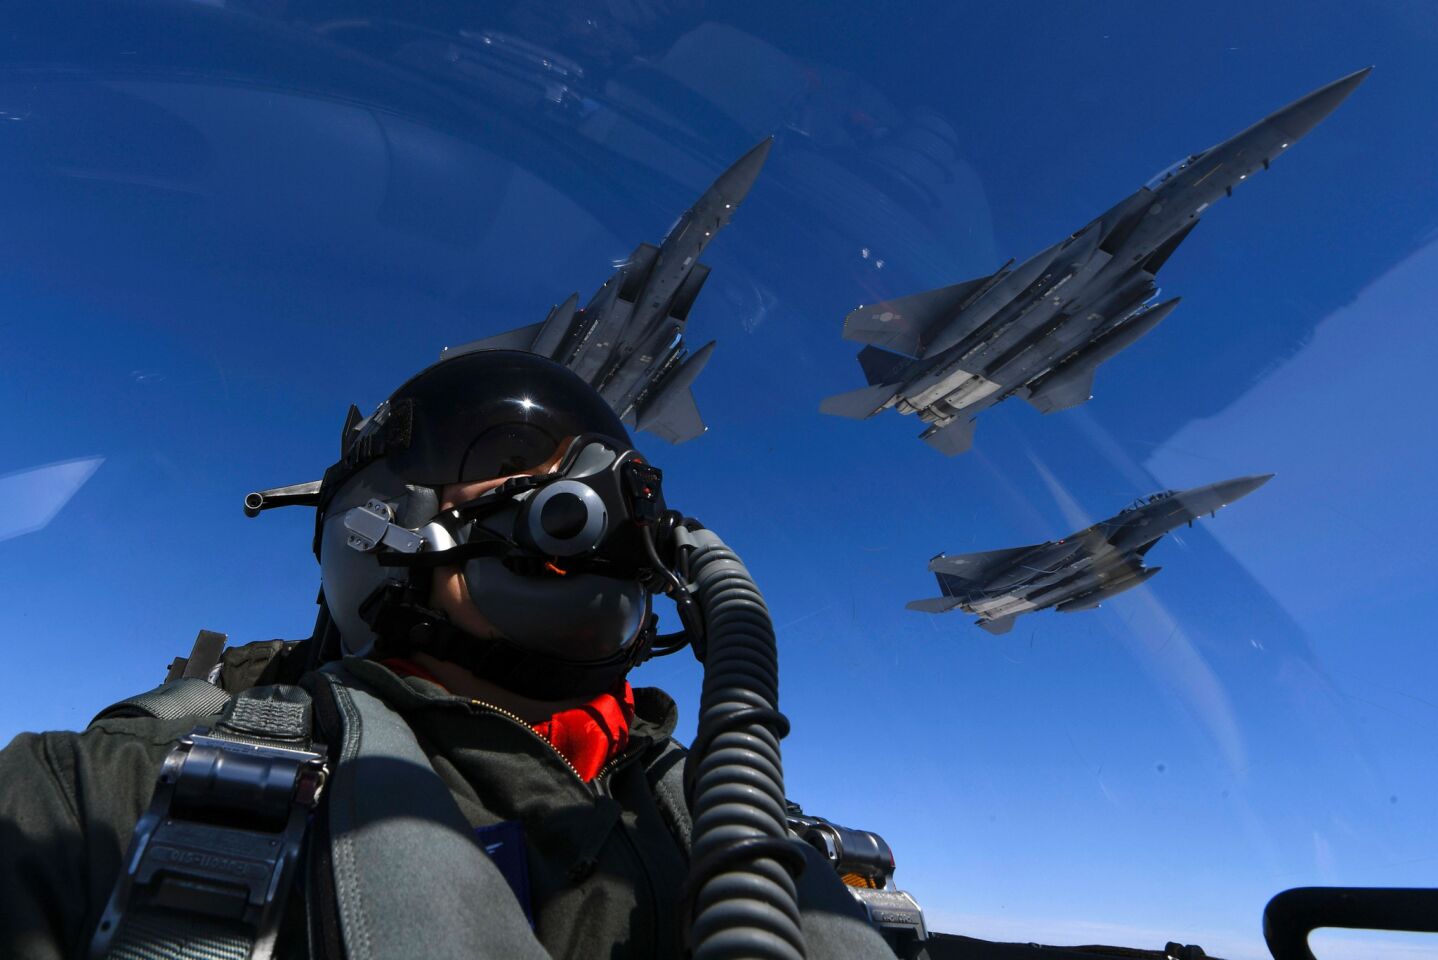 A U.S. Air Force pilot joins up with South Korean air force F-15s during a 10-hour mission from Andersen Air Force Base, Guam, into Japanese airspace and over the Korean Peninsula. North Korea on Aug. 8, 2017, said that it is considering strikes on U.S. strategic military installations in Guam with its intermediate-range ballistic missiles, state news agency KCNA reported.